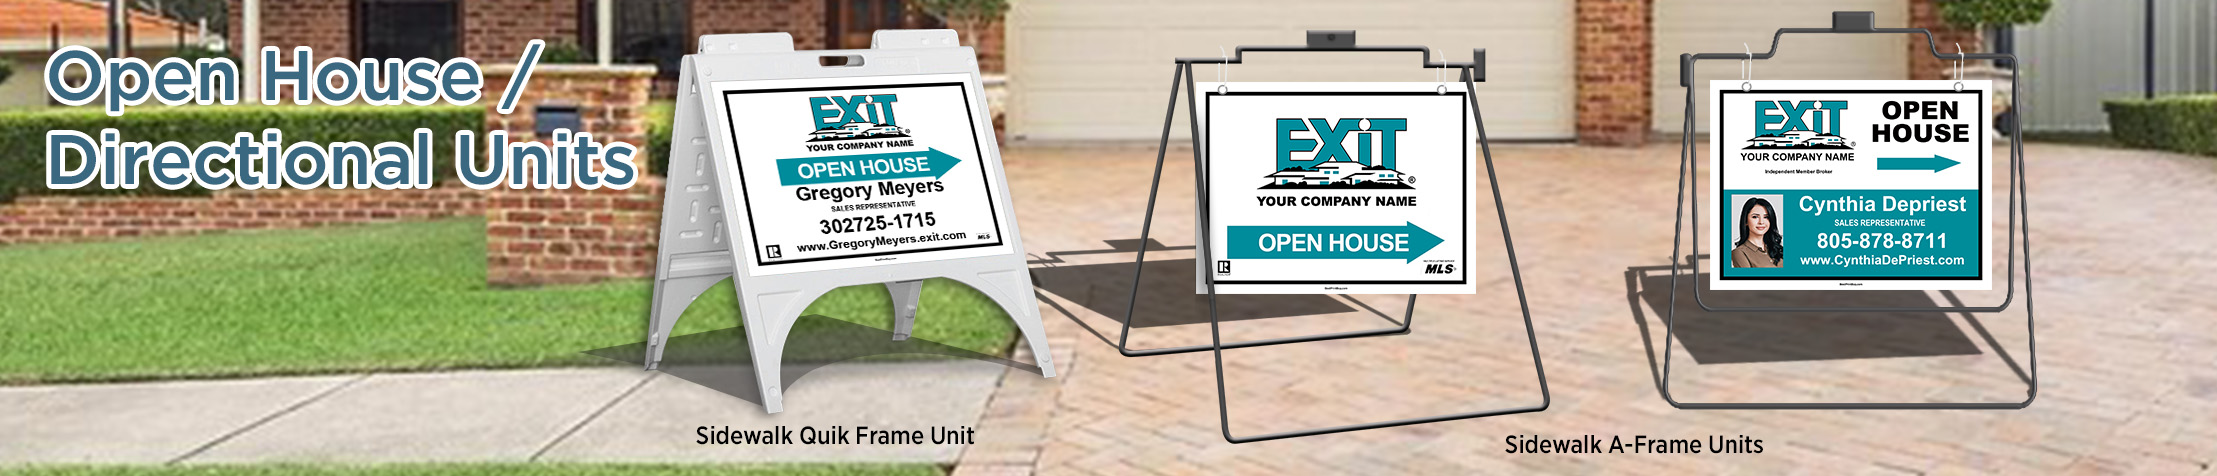 Exit Realty Open House/Directional Units - Exit Realty approved vendor real estate Sidewalk A-Frame signs | BestPrintBuy.com